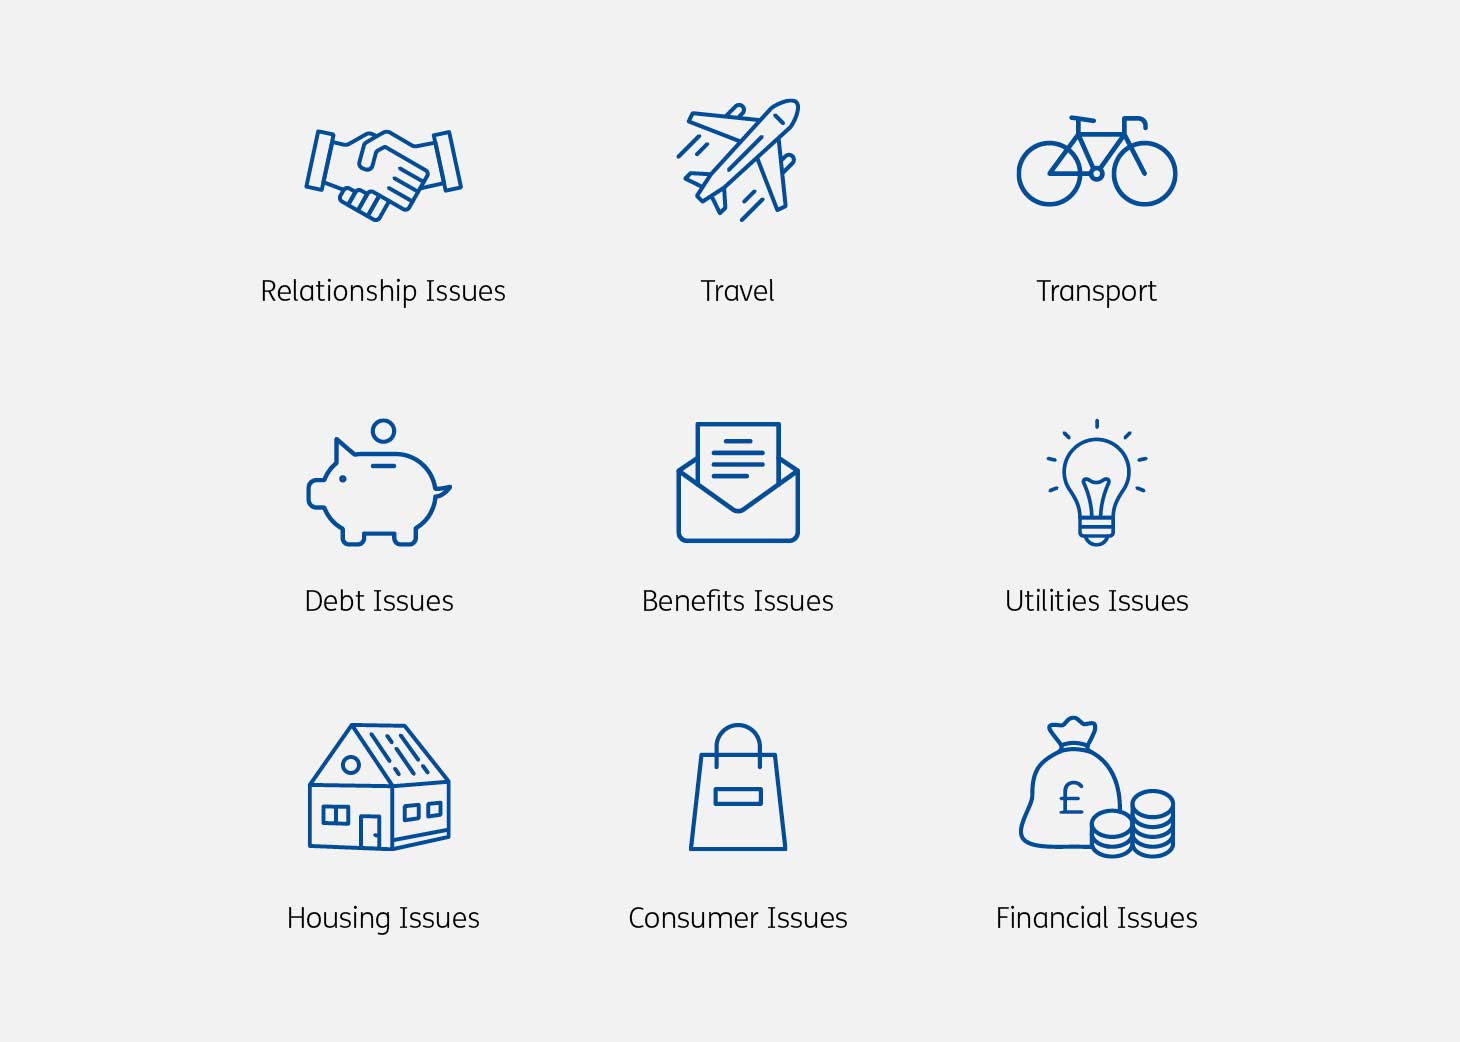 Nine different iconography including hand shake, plane, bike, piggy bank, envelop, light bulb, house, shopping bag and money.